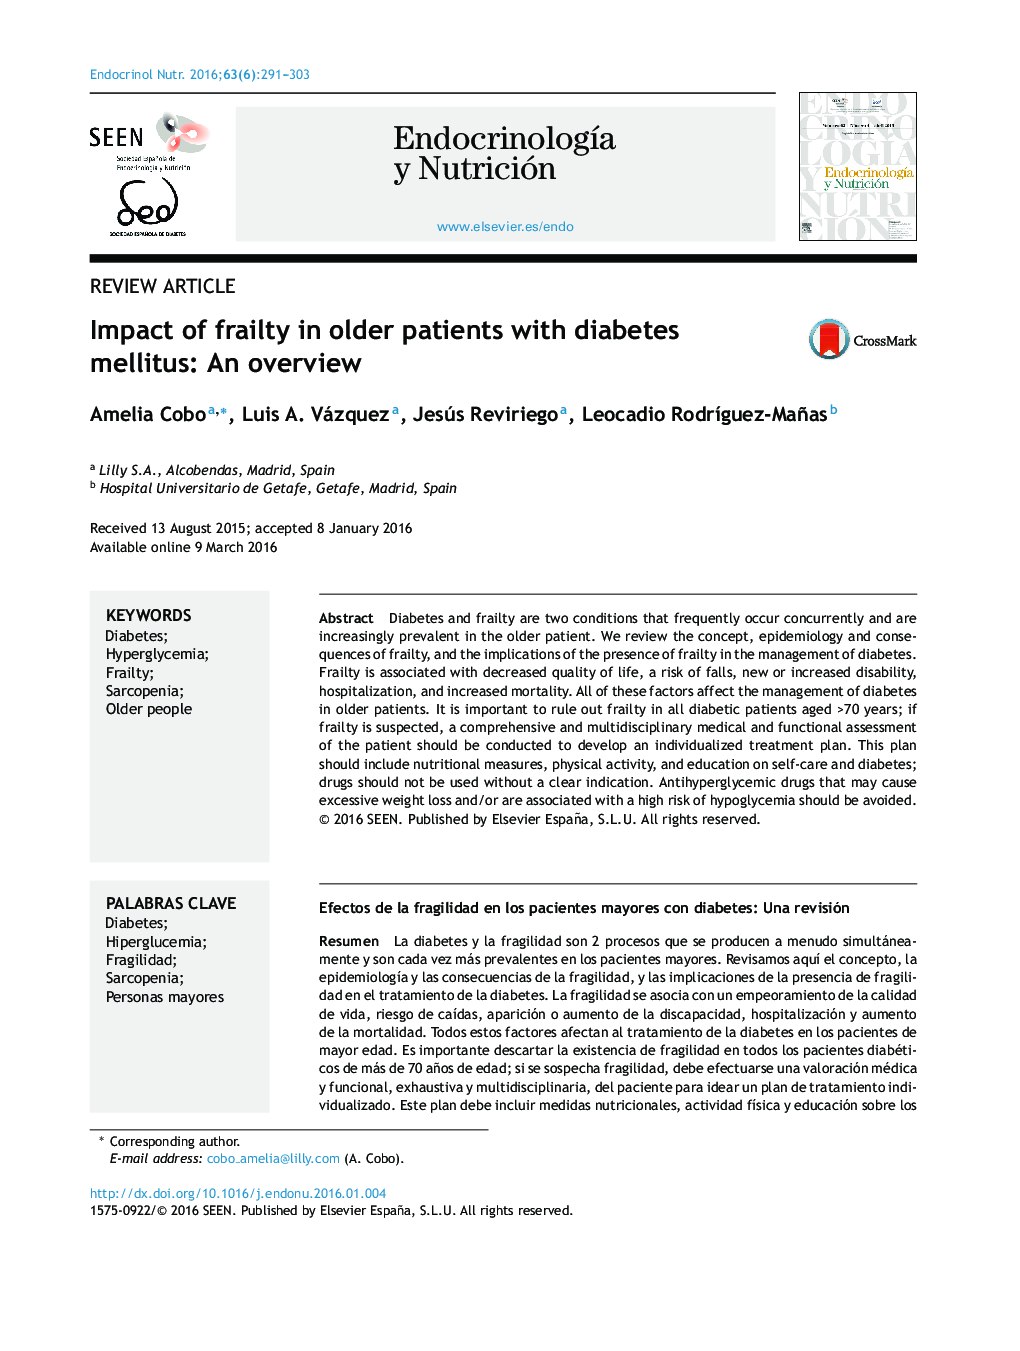 Impact of frailty in older patients with diabetes mellitus: An overview